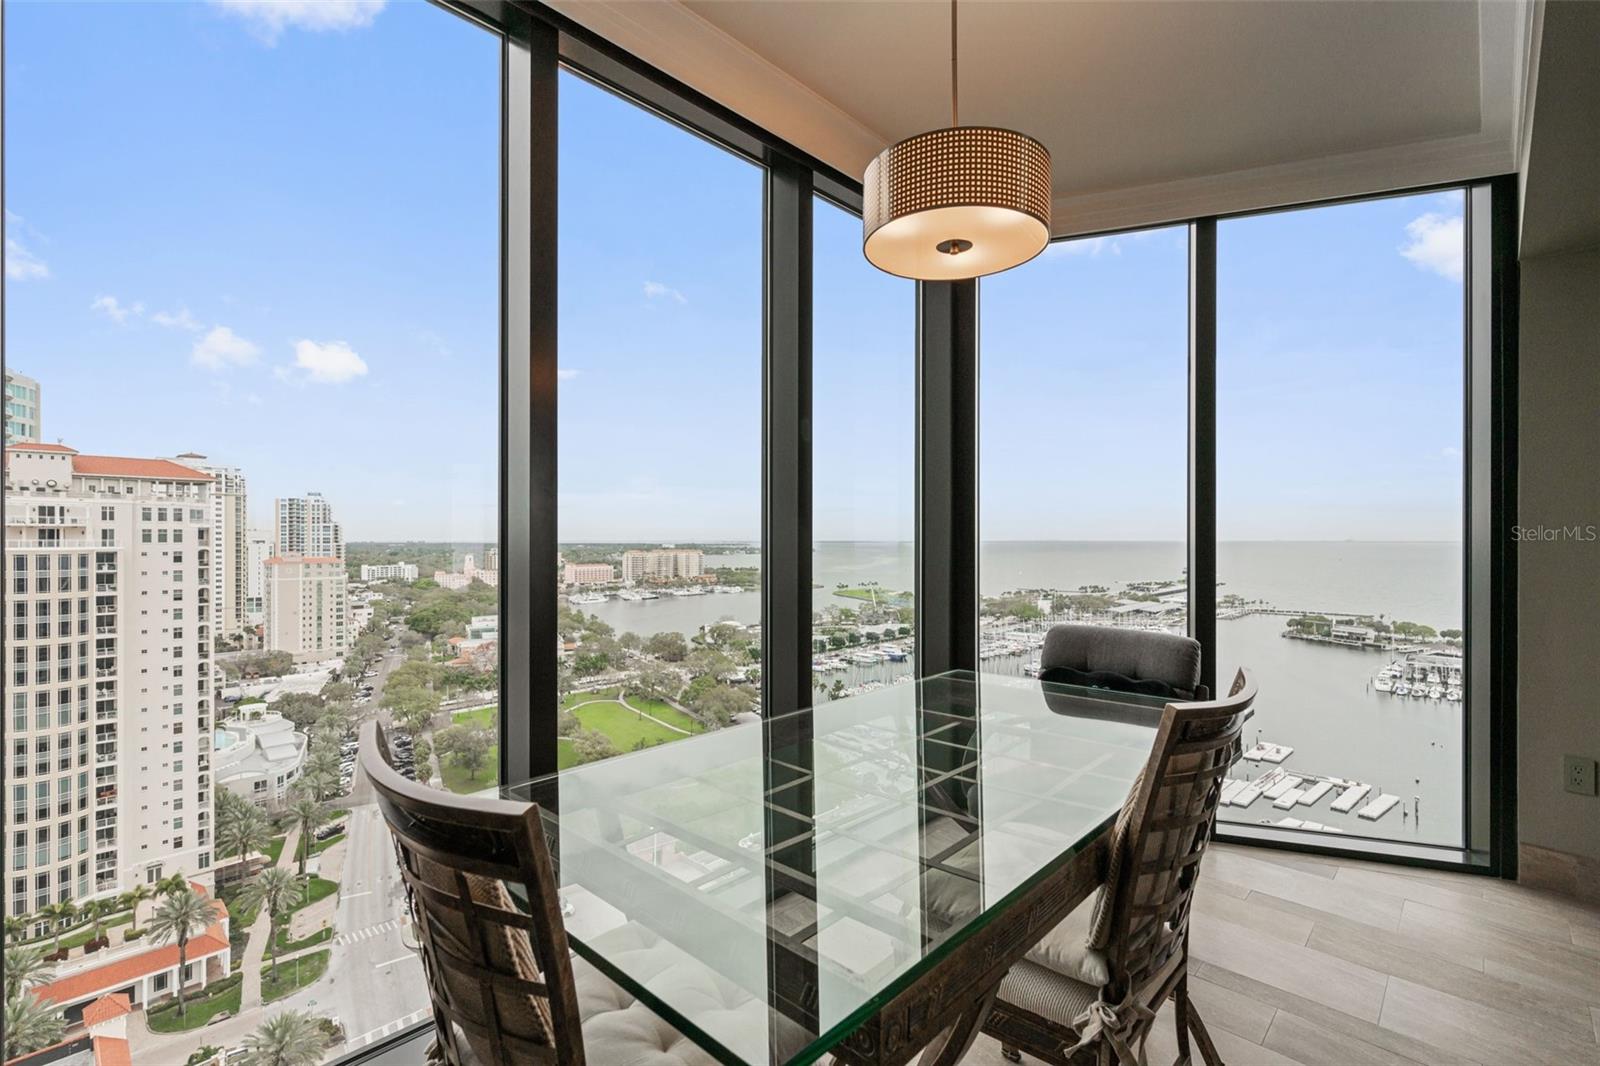 Living room views, city views to Vinoy with marina, Pier, Tampa Bay parks and more !